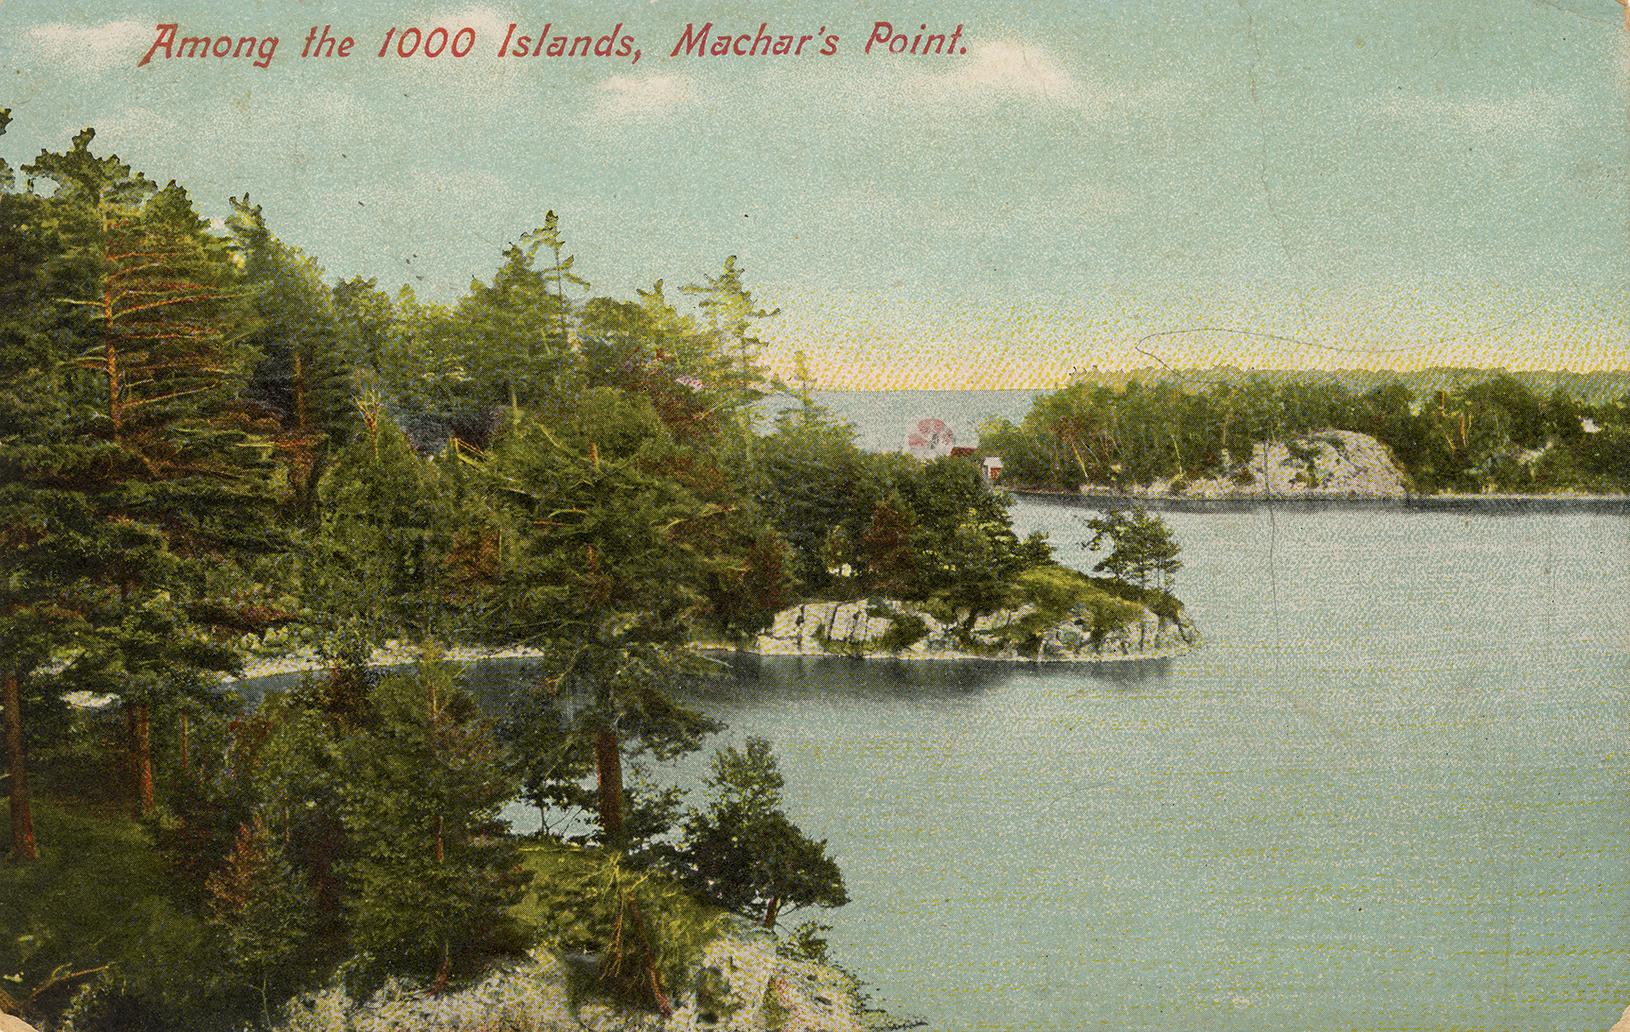 Colorized photograph of a body of water with wilderness surrounding it.